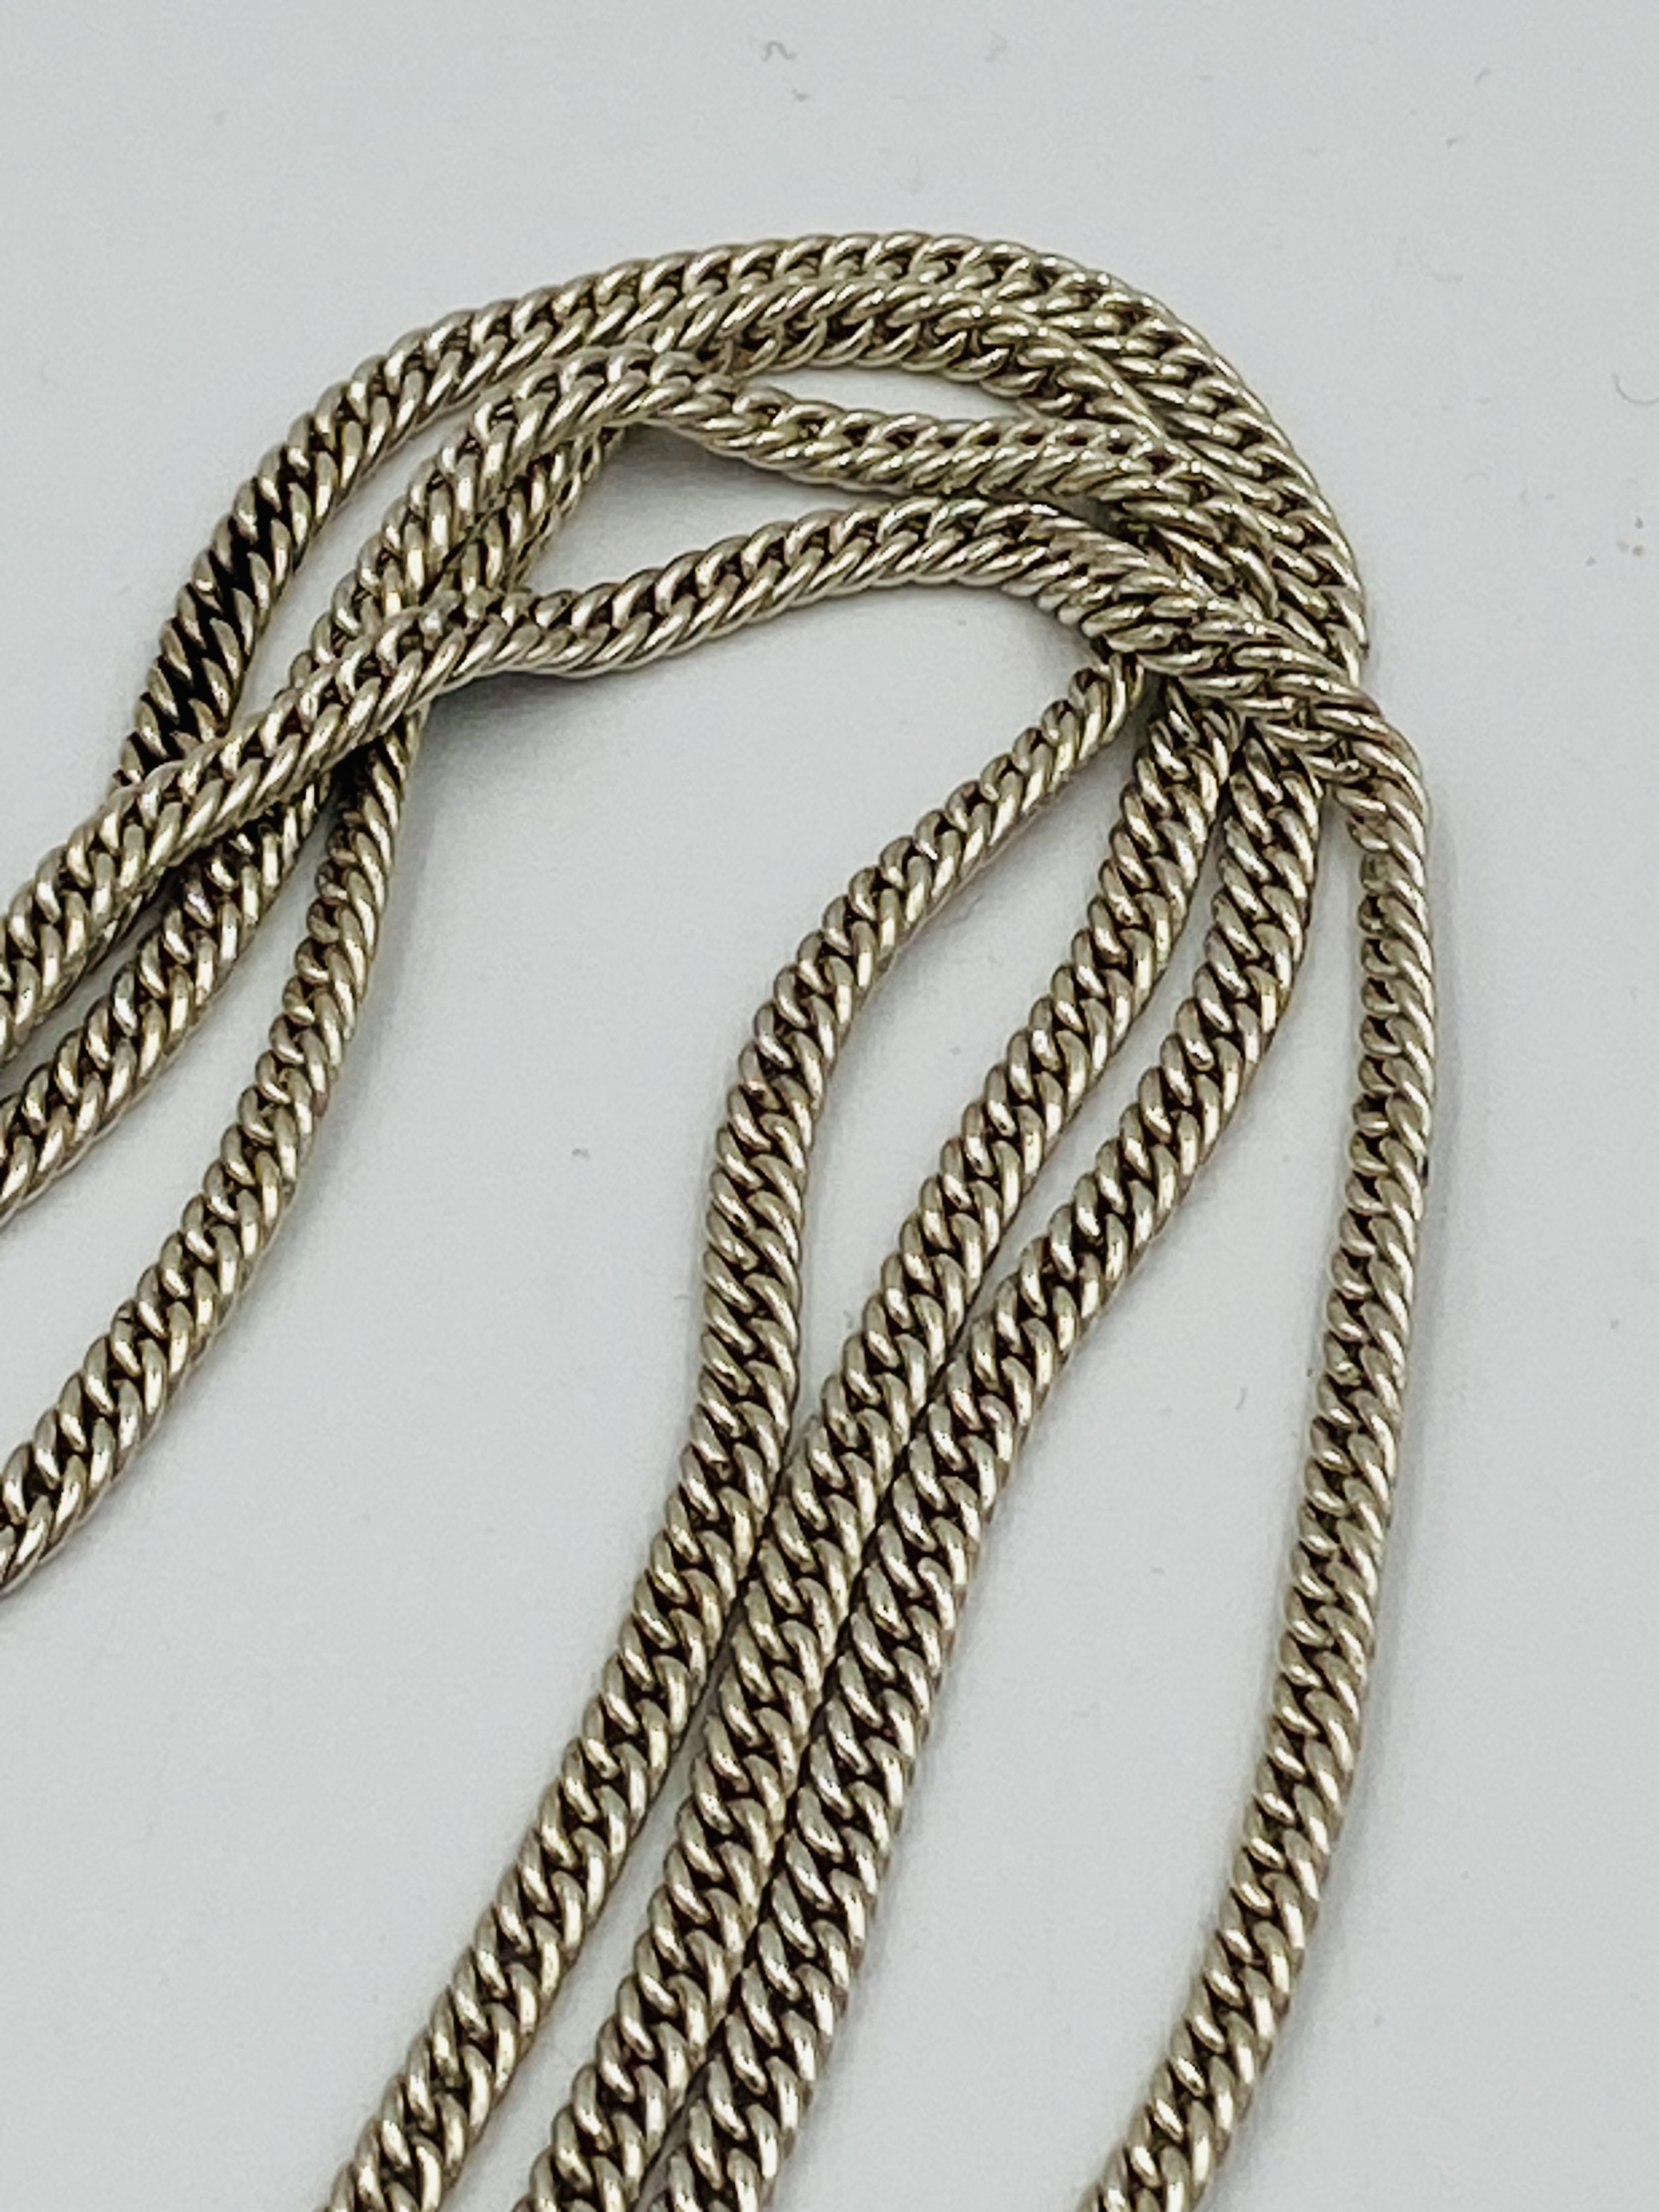 Silver muff chain - Image 2 of 3